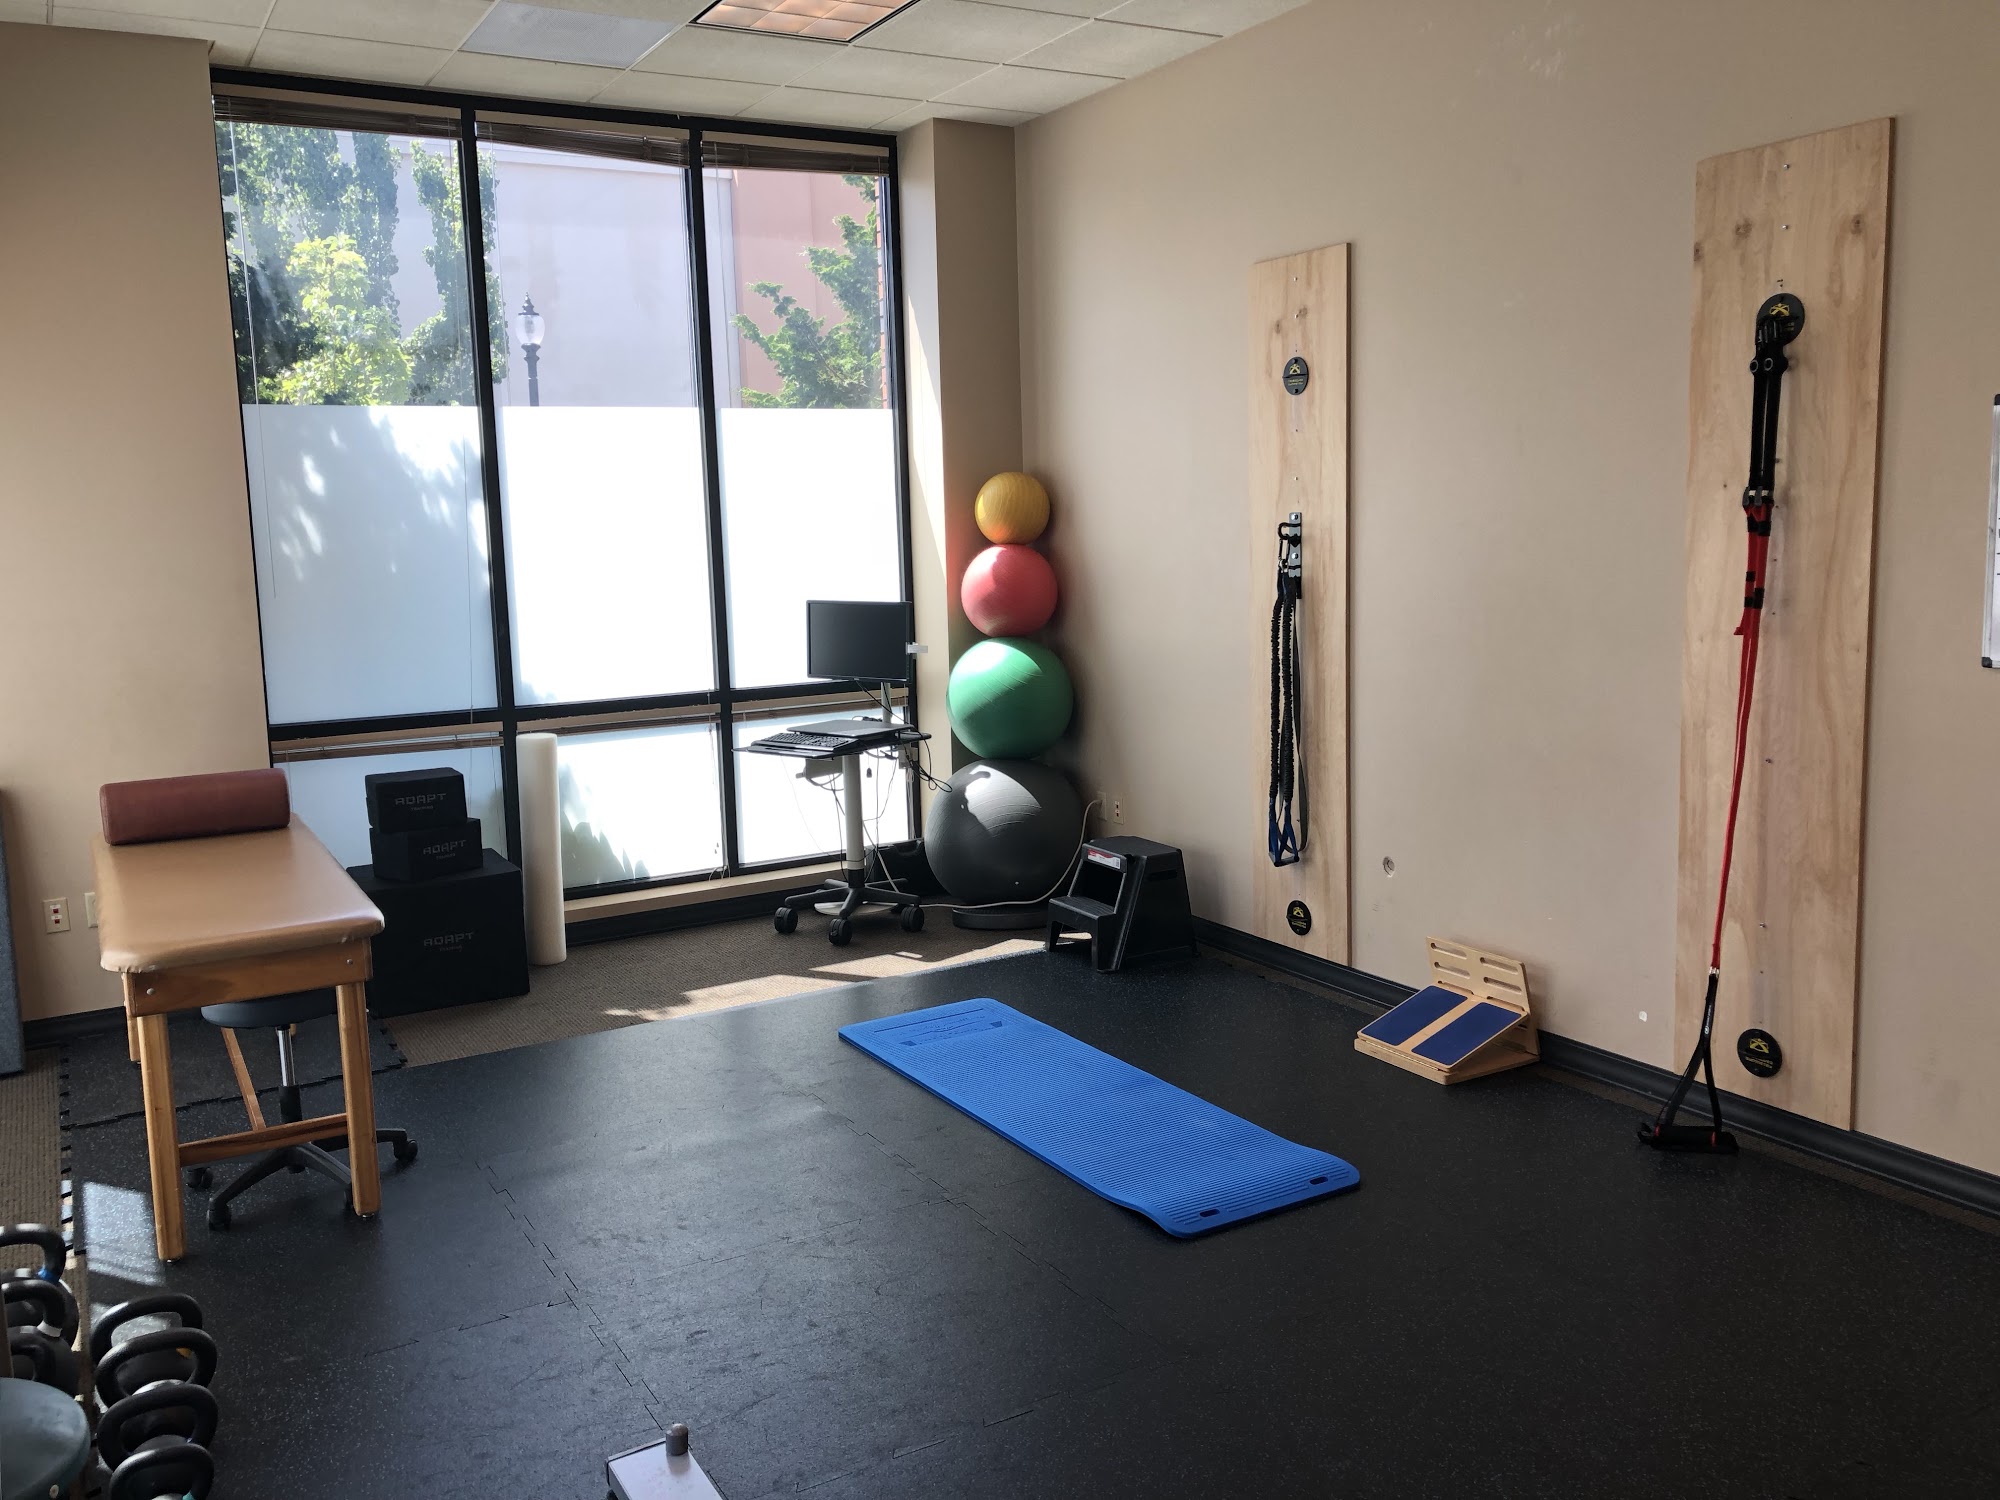 Active Motion Spine & Rehab